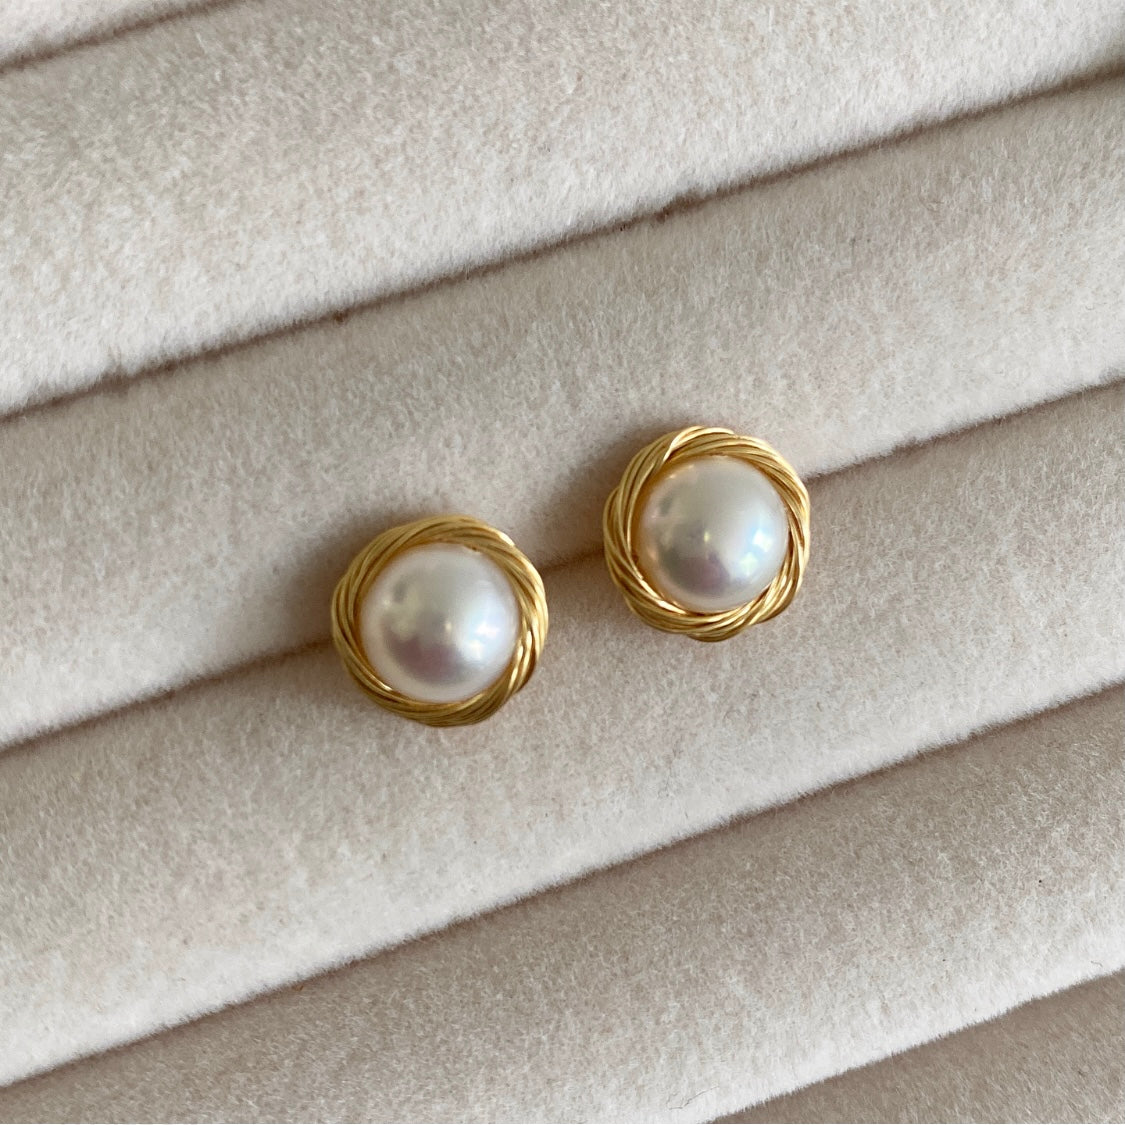 These classic, effortless pearl stud earrings are made with quality sterling silver for long-lasting shine. Perfect for any occasion, these earrings will become a staple of your jewelry collection. Earring size 1.5cm